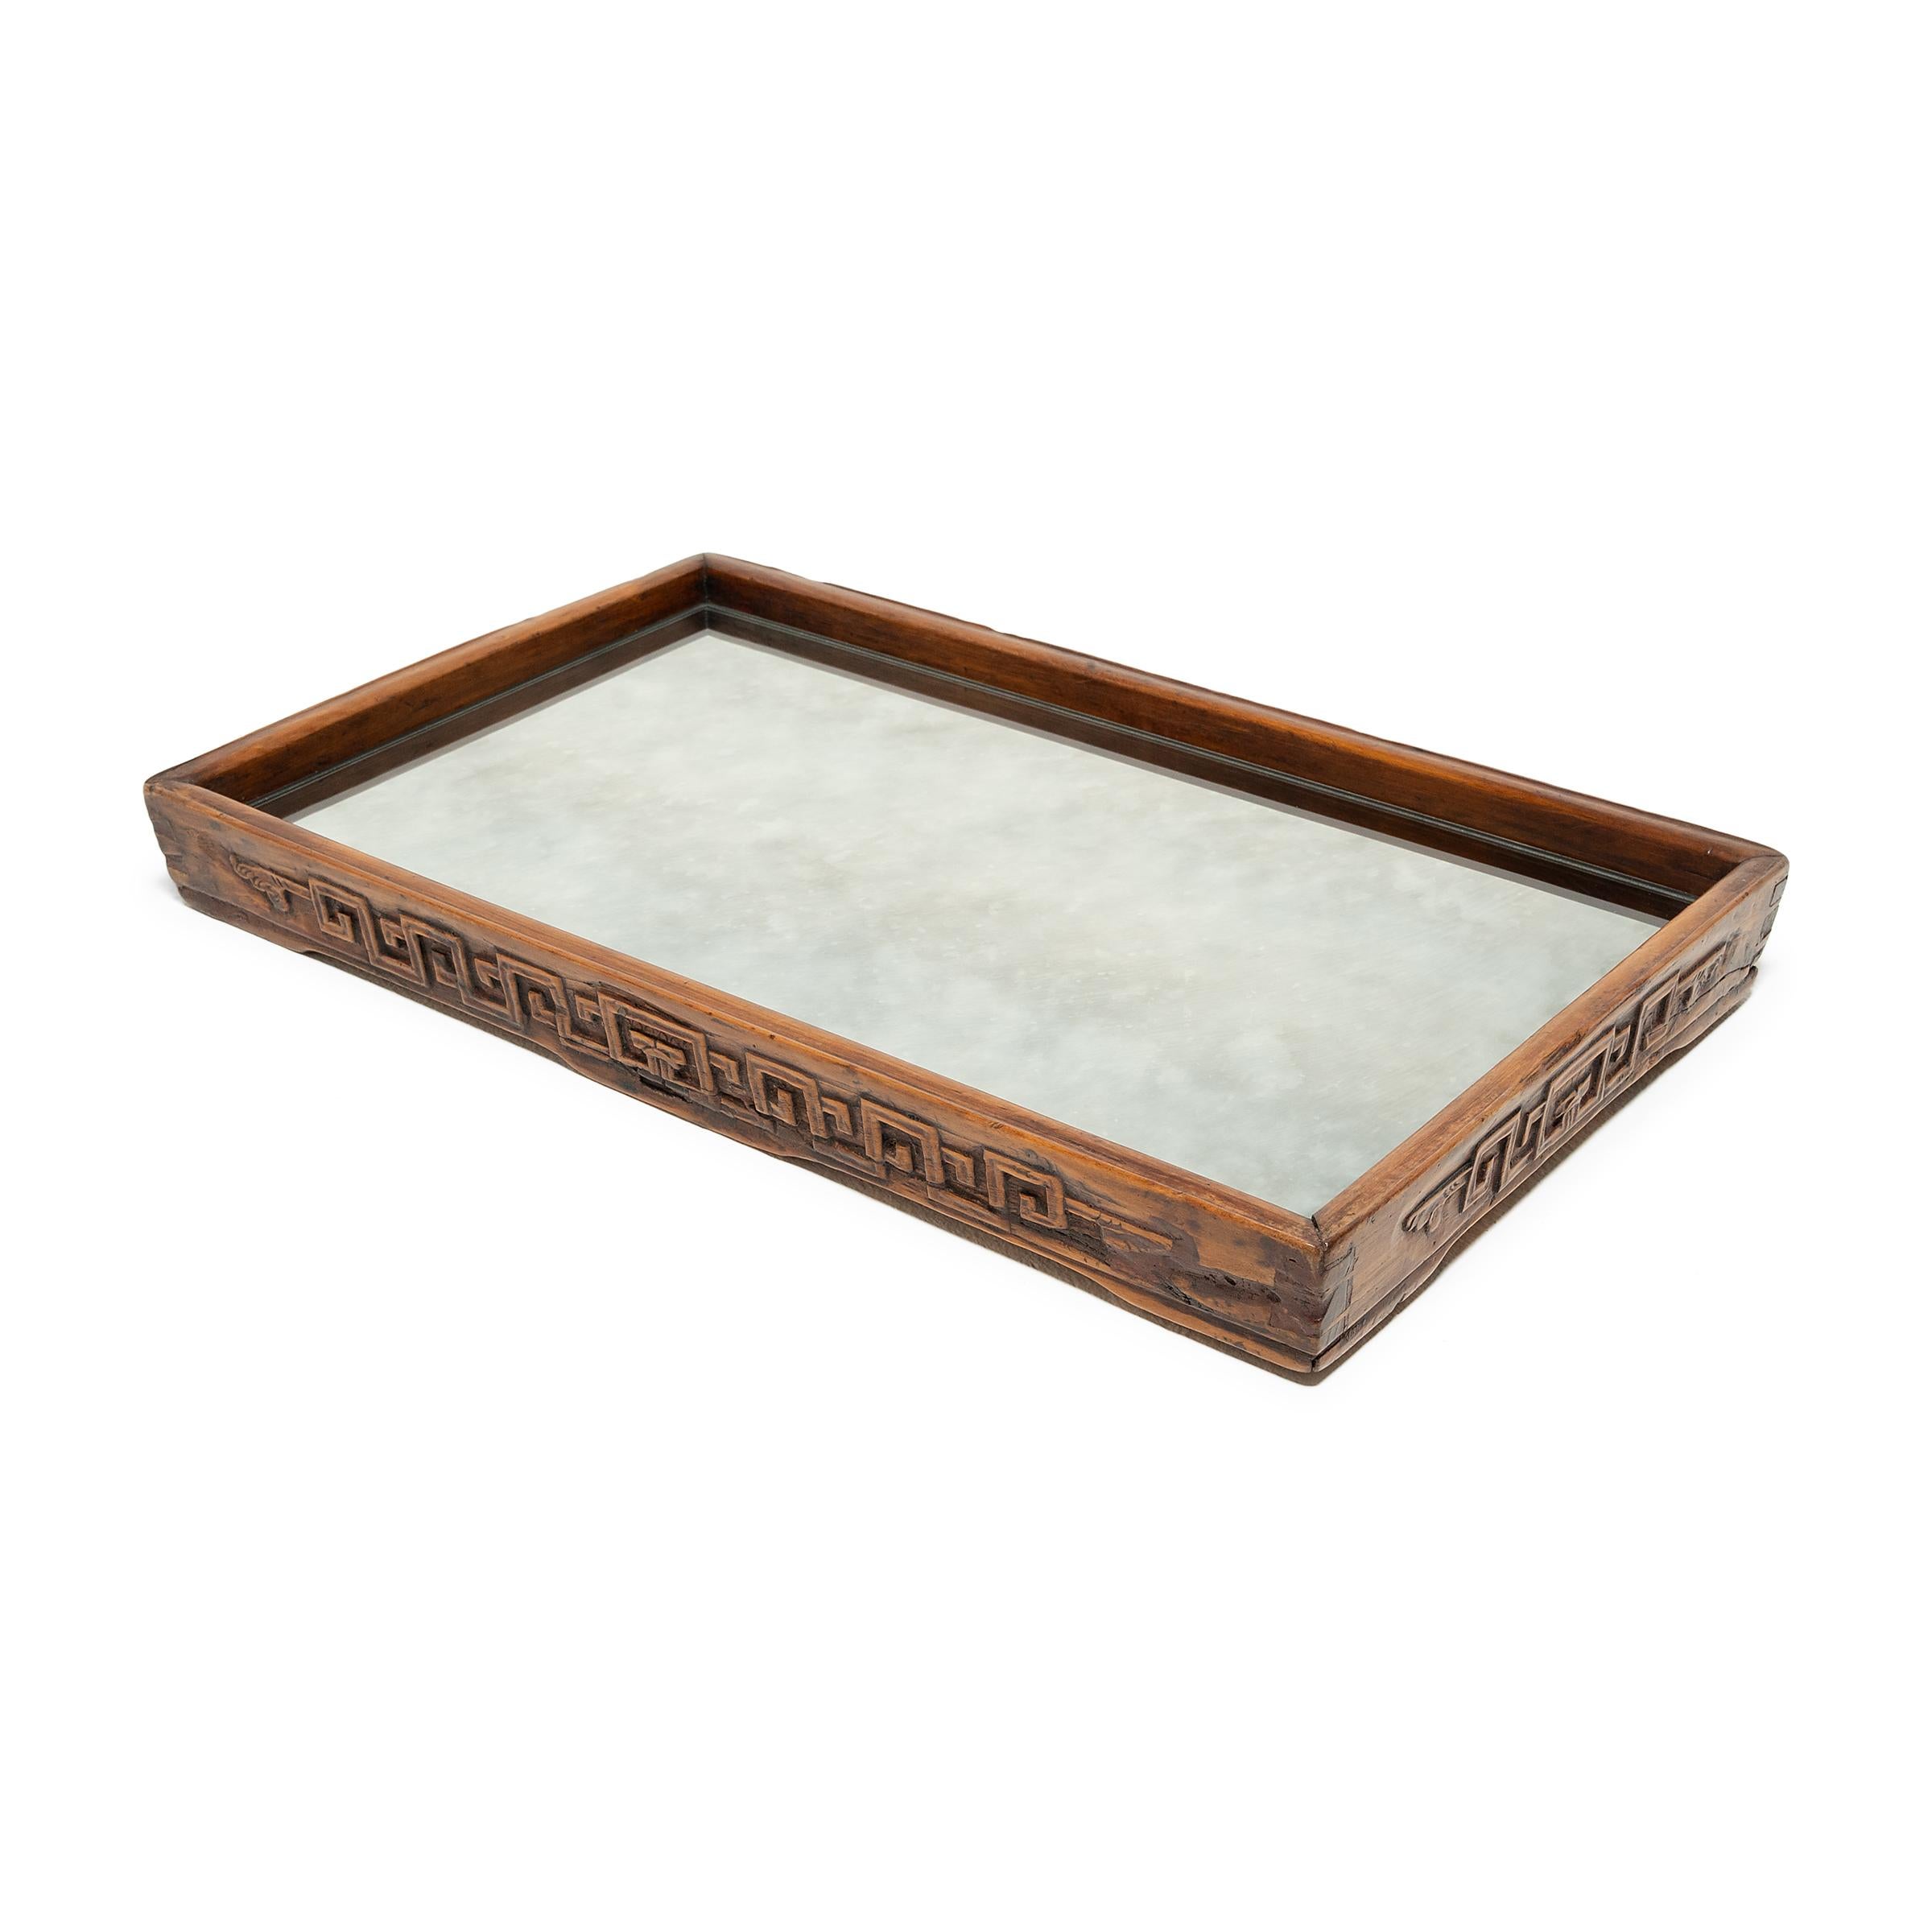 Dovetail joinery and carved geometric scrollwork add charming detail to the simple lines of this century-old provincial tray. The rectangular tray has developed great character from years of serving tea, likely for friends and family gathered on